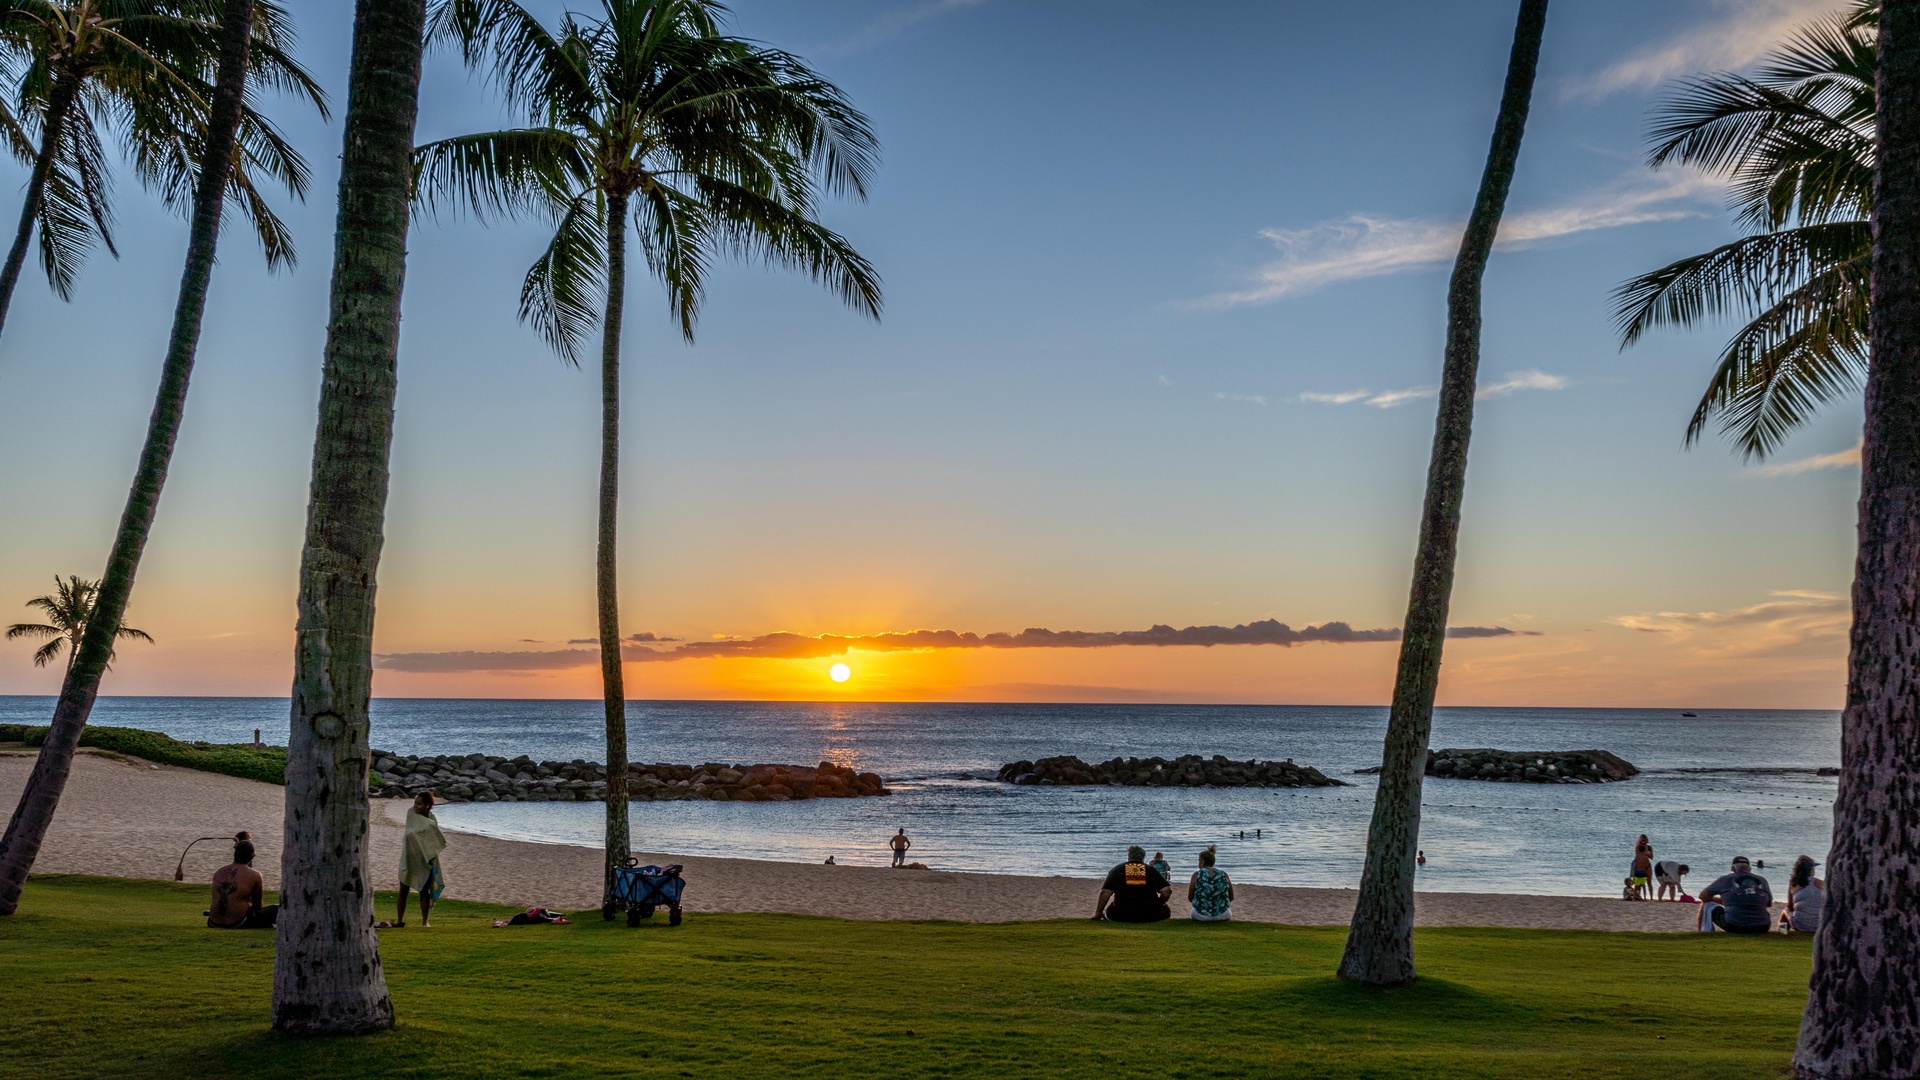 Kapolei Vacation Rentals, Coconut Plantation 1234-2 - Magical sunsets over the lagoon.